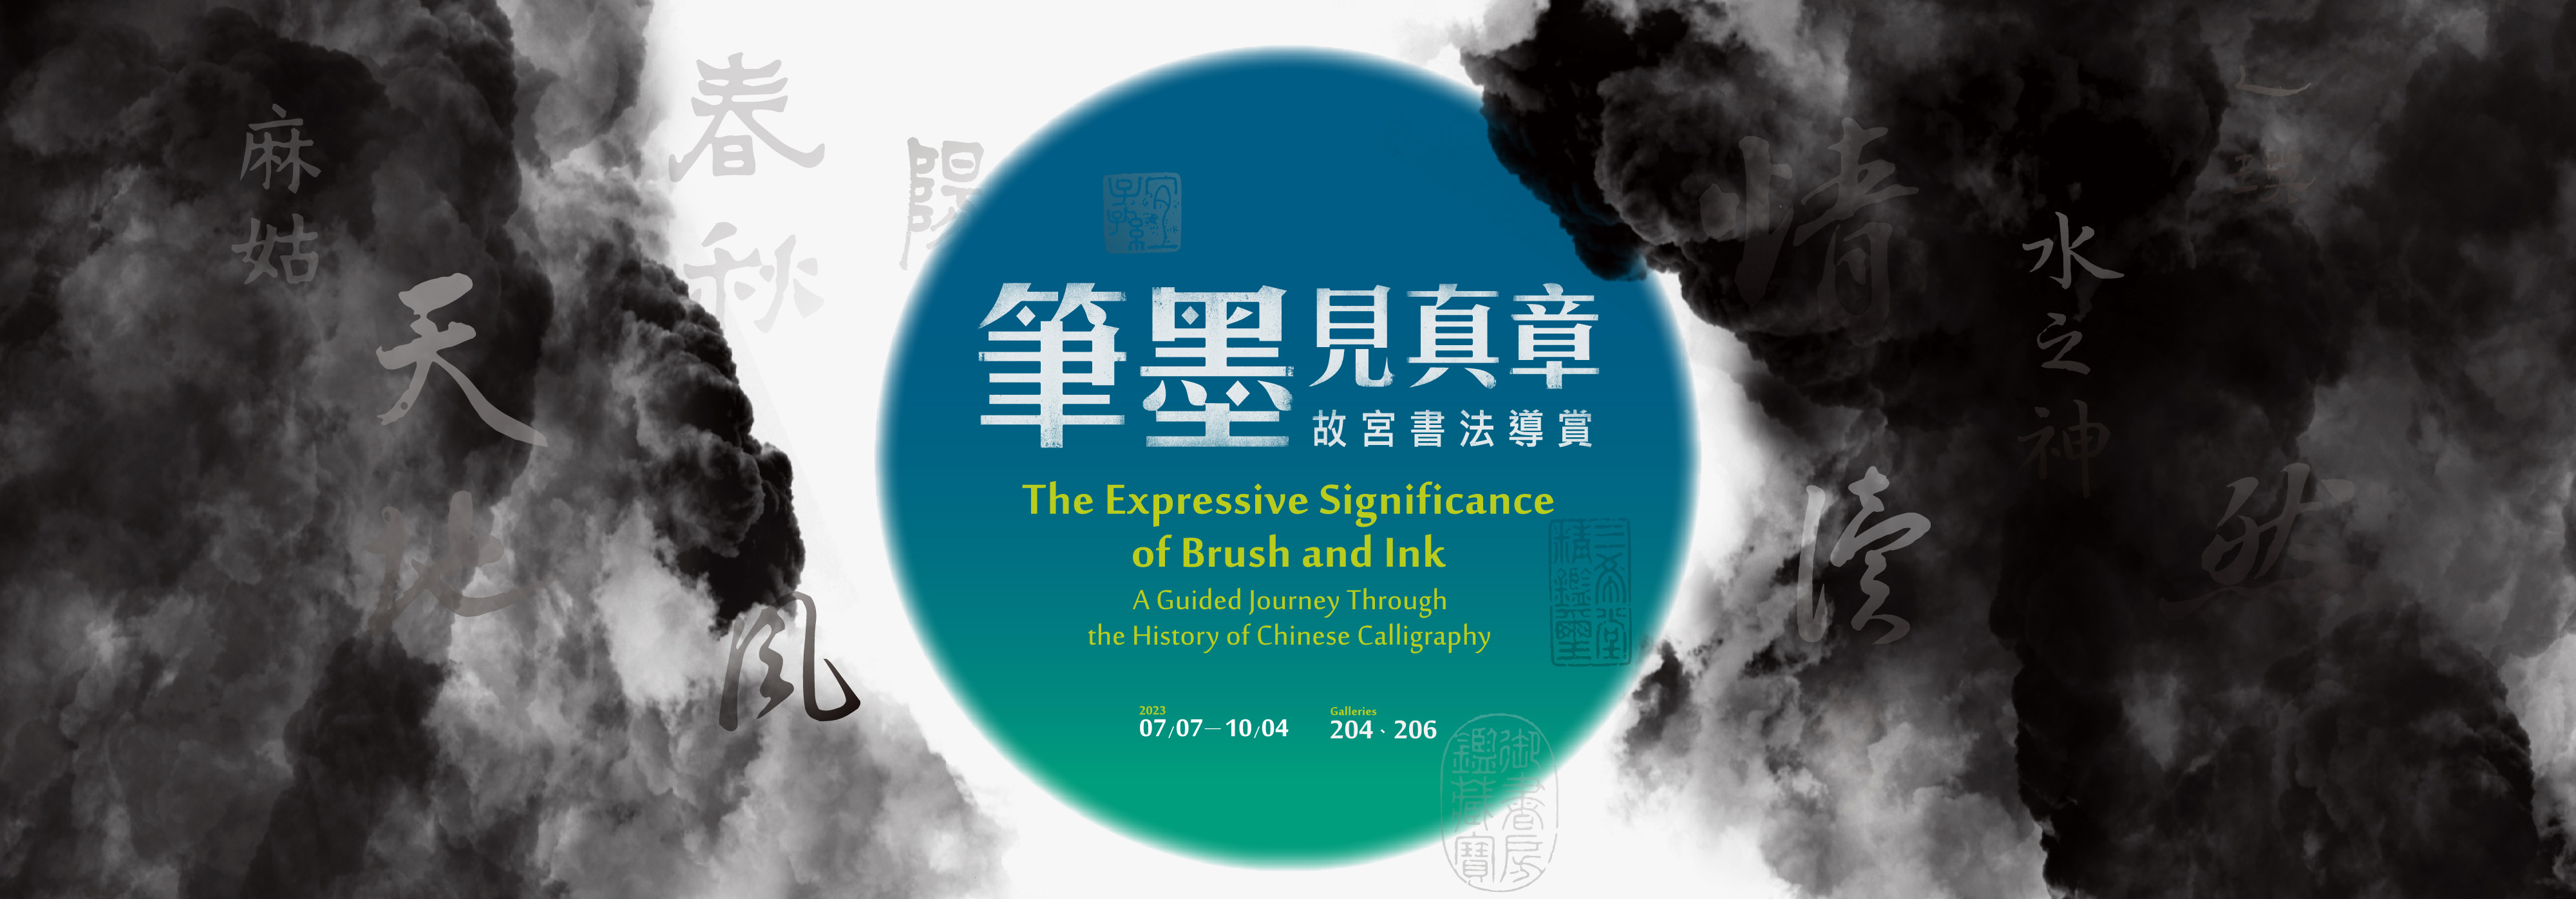 The Expressive Significance of Brush and Ink : A Guided Journey Through the History of Chinese Calligraphy II